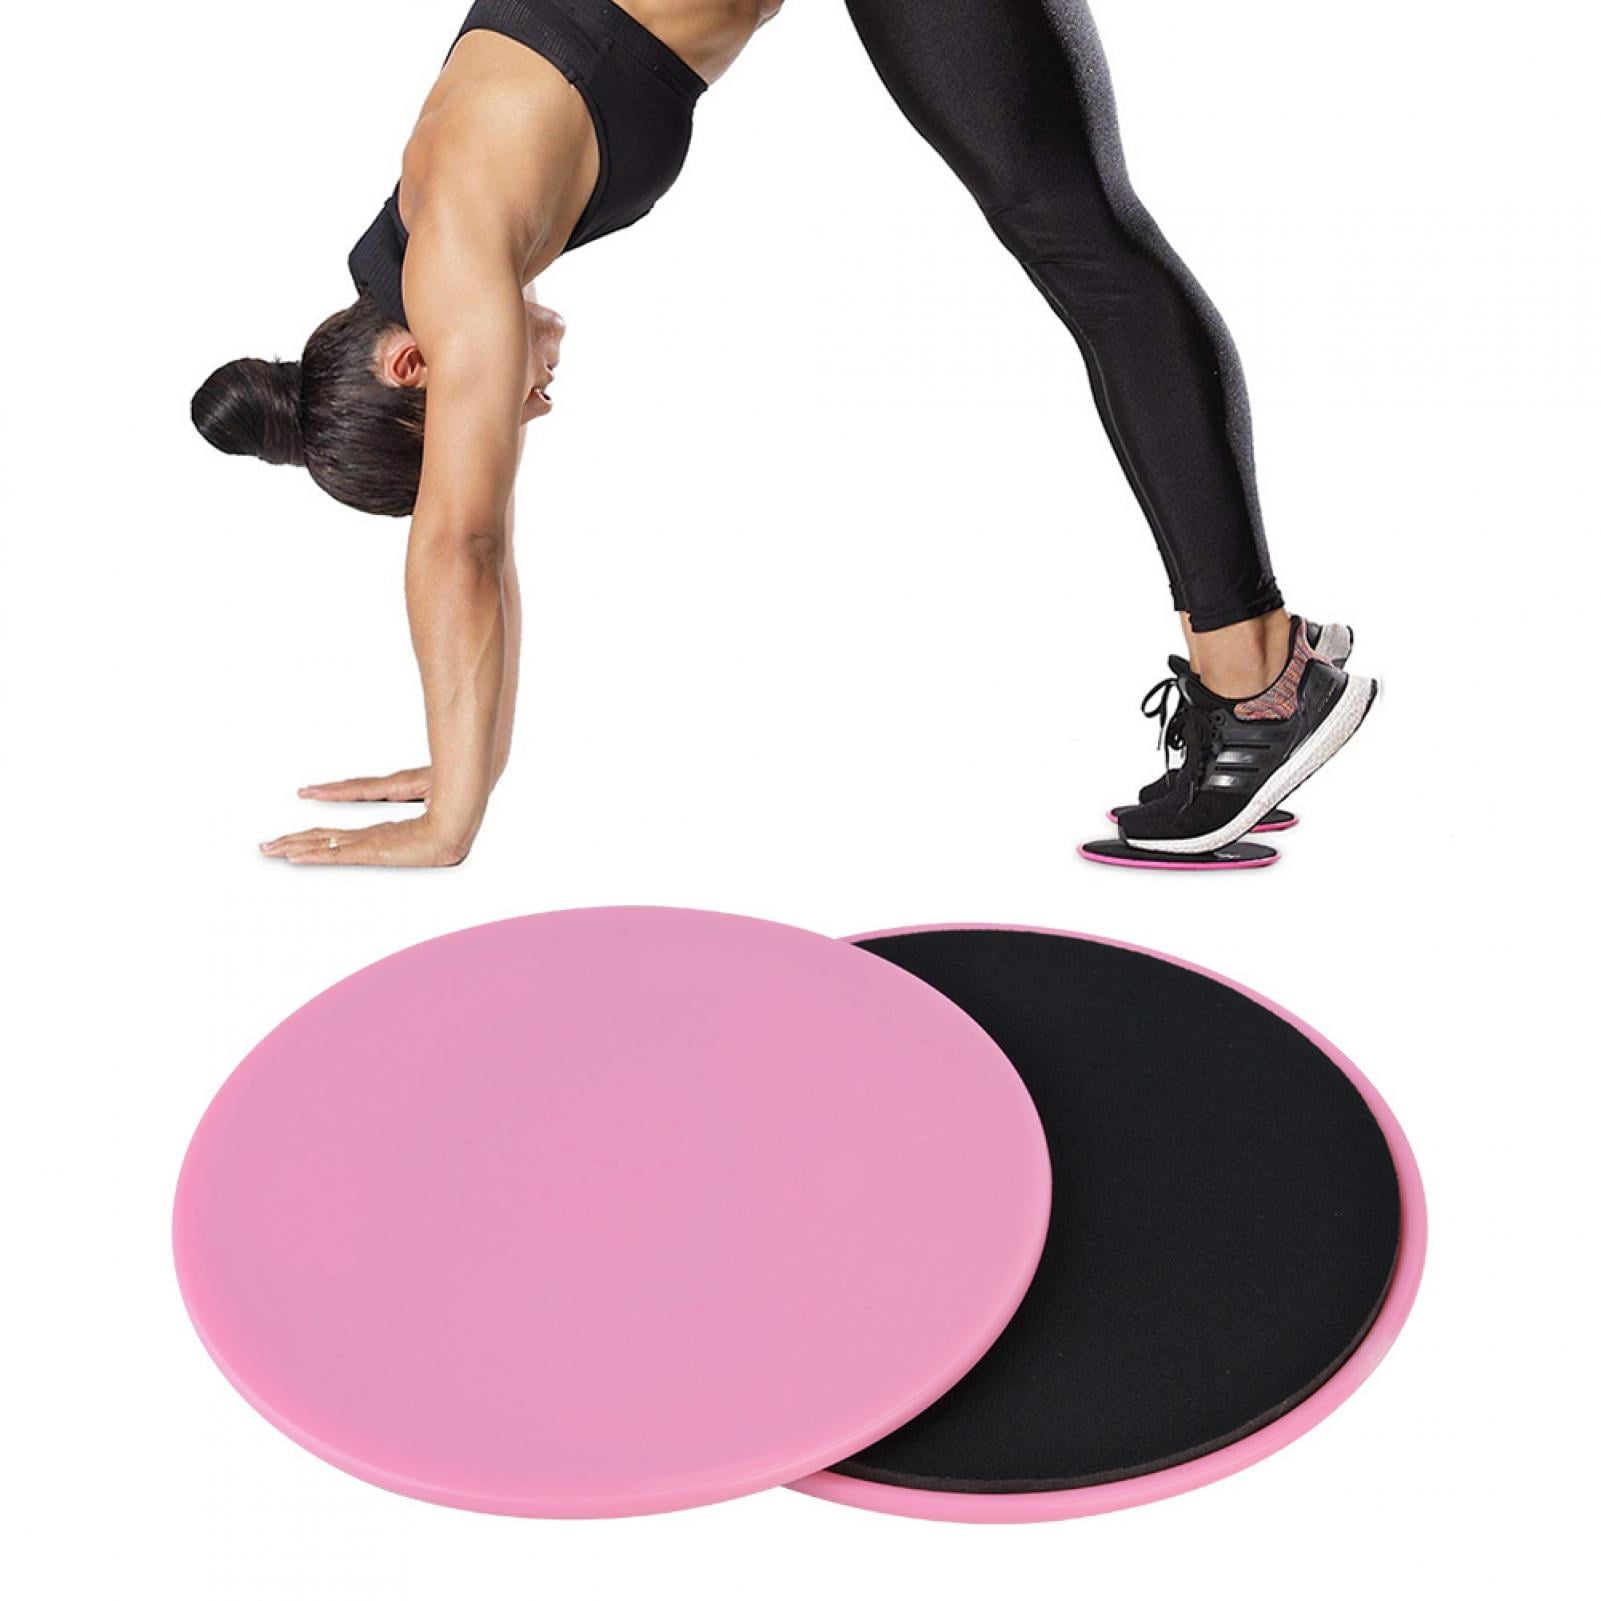 Fitness Gym Core Sliders Gliding Disc Cardio Abs Exercise Workout Yoga Set of 2 